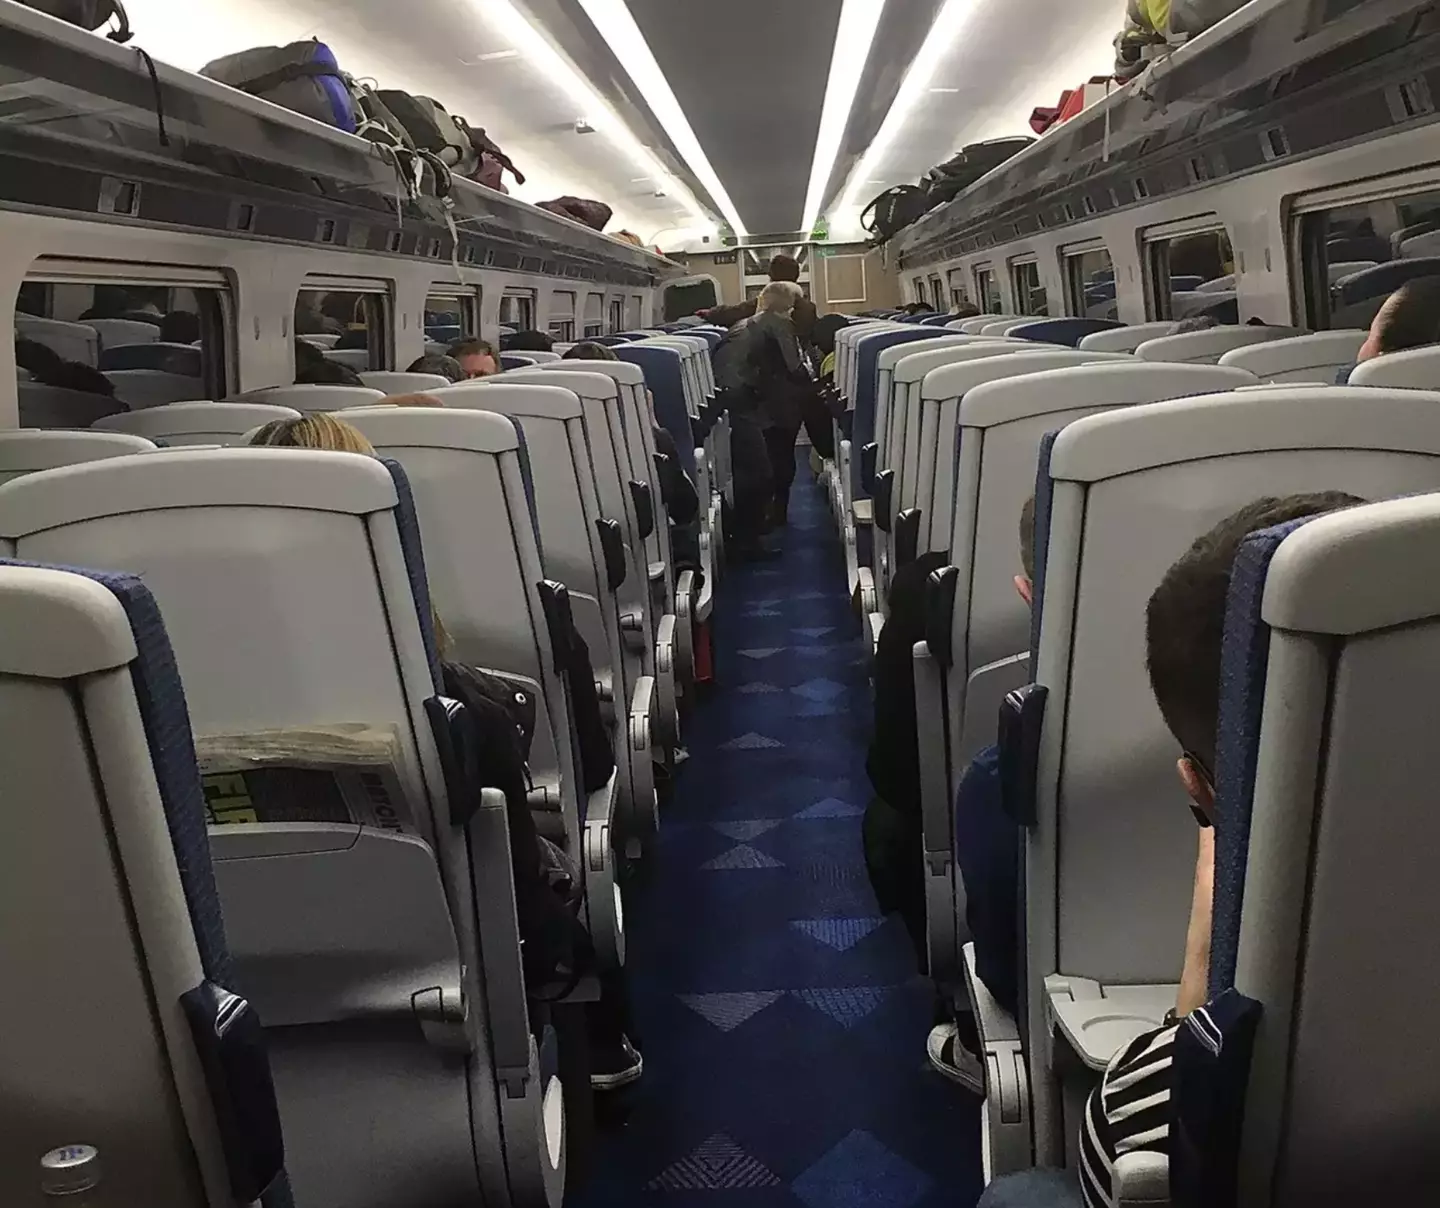 A train passenger has spoken out about their seat being taken.